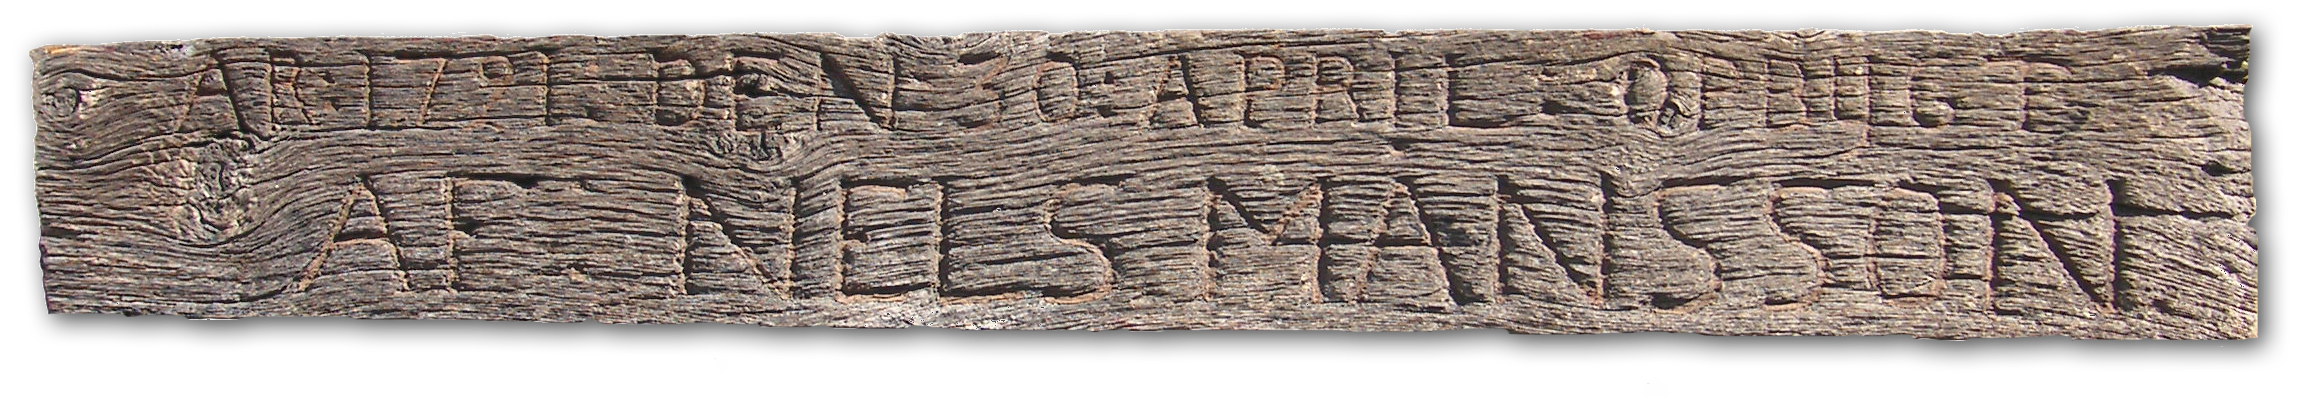 Nels Månsson's wooden sign from 1721.